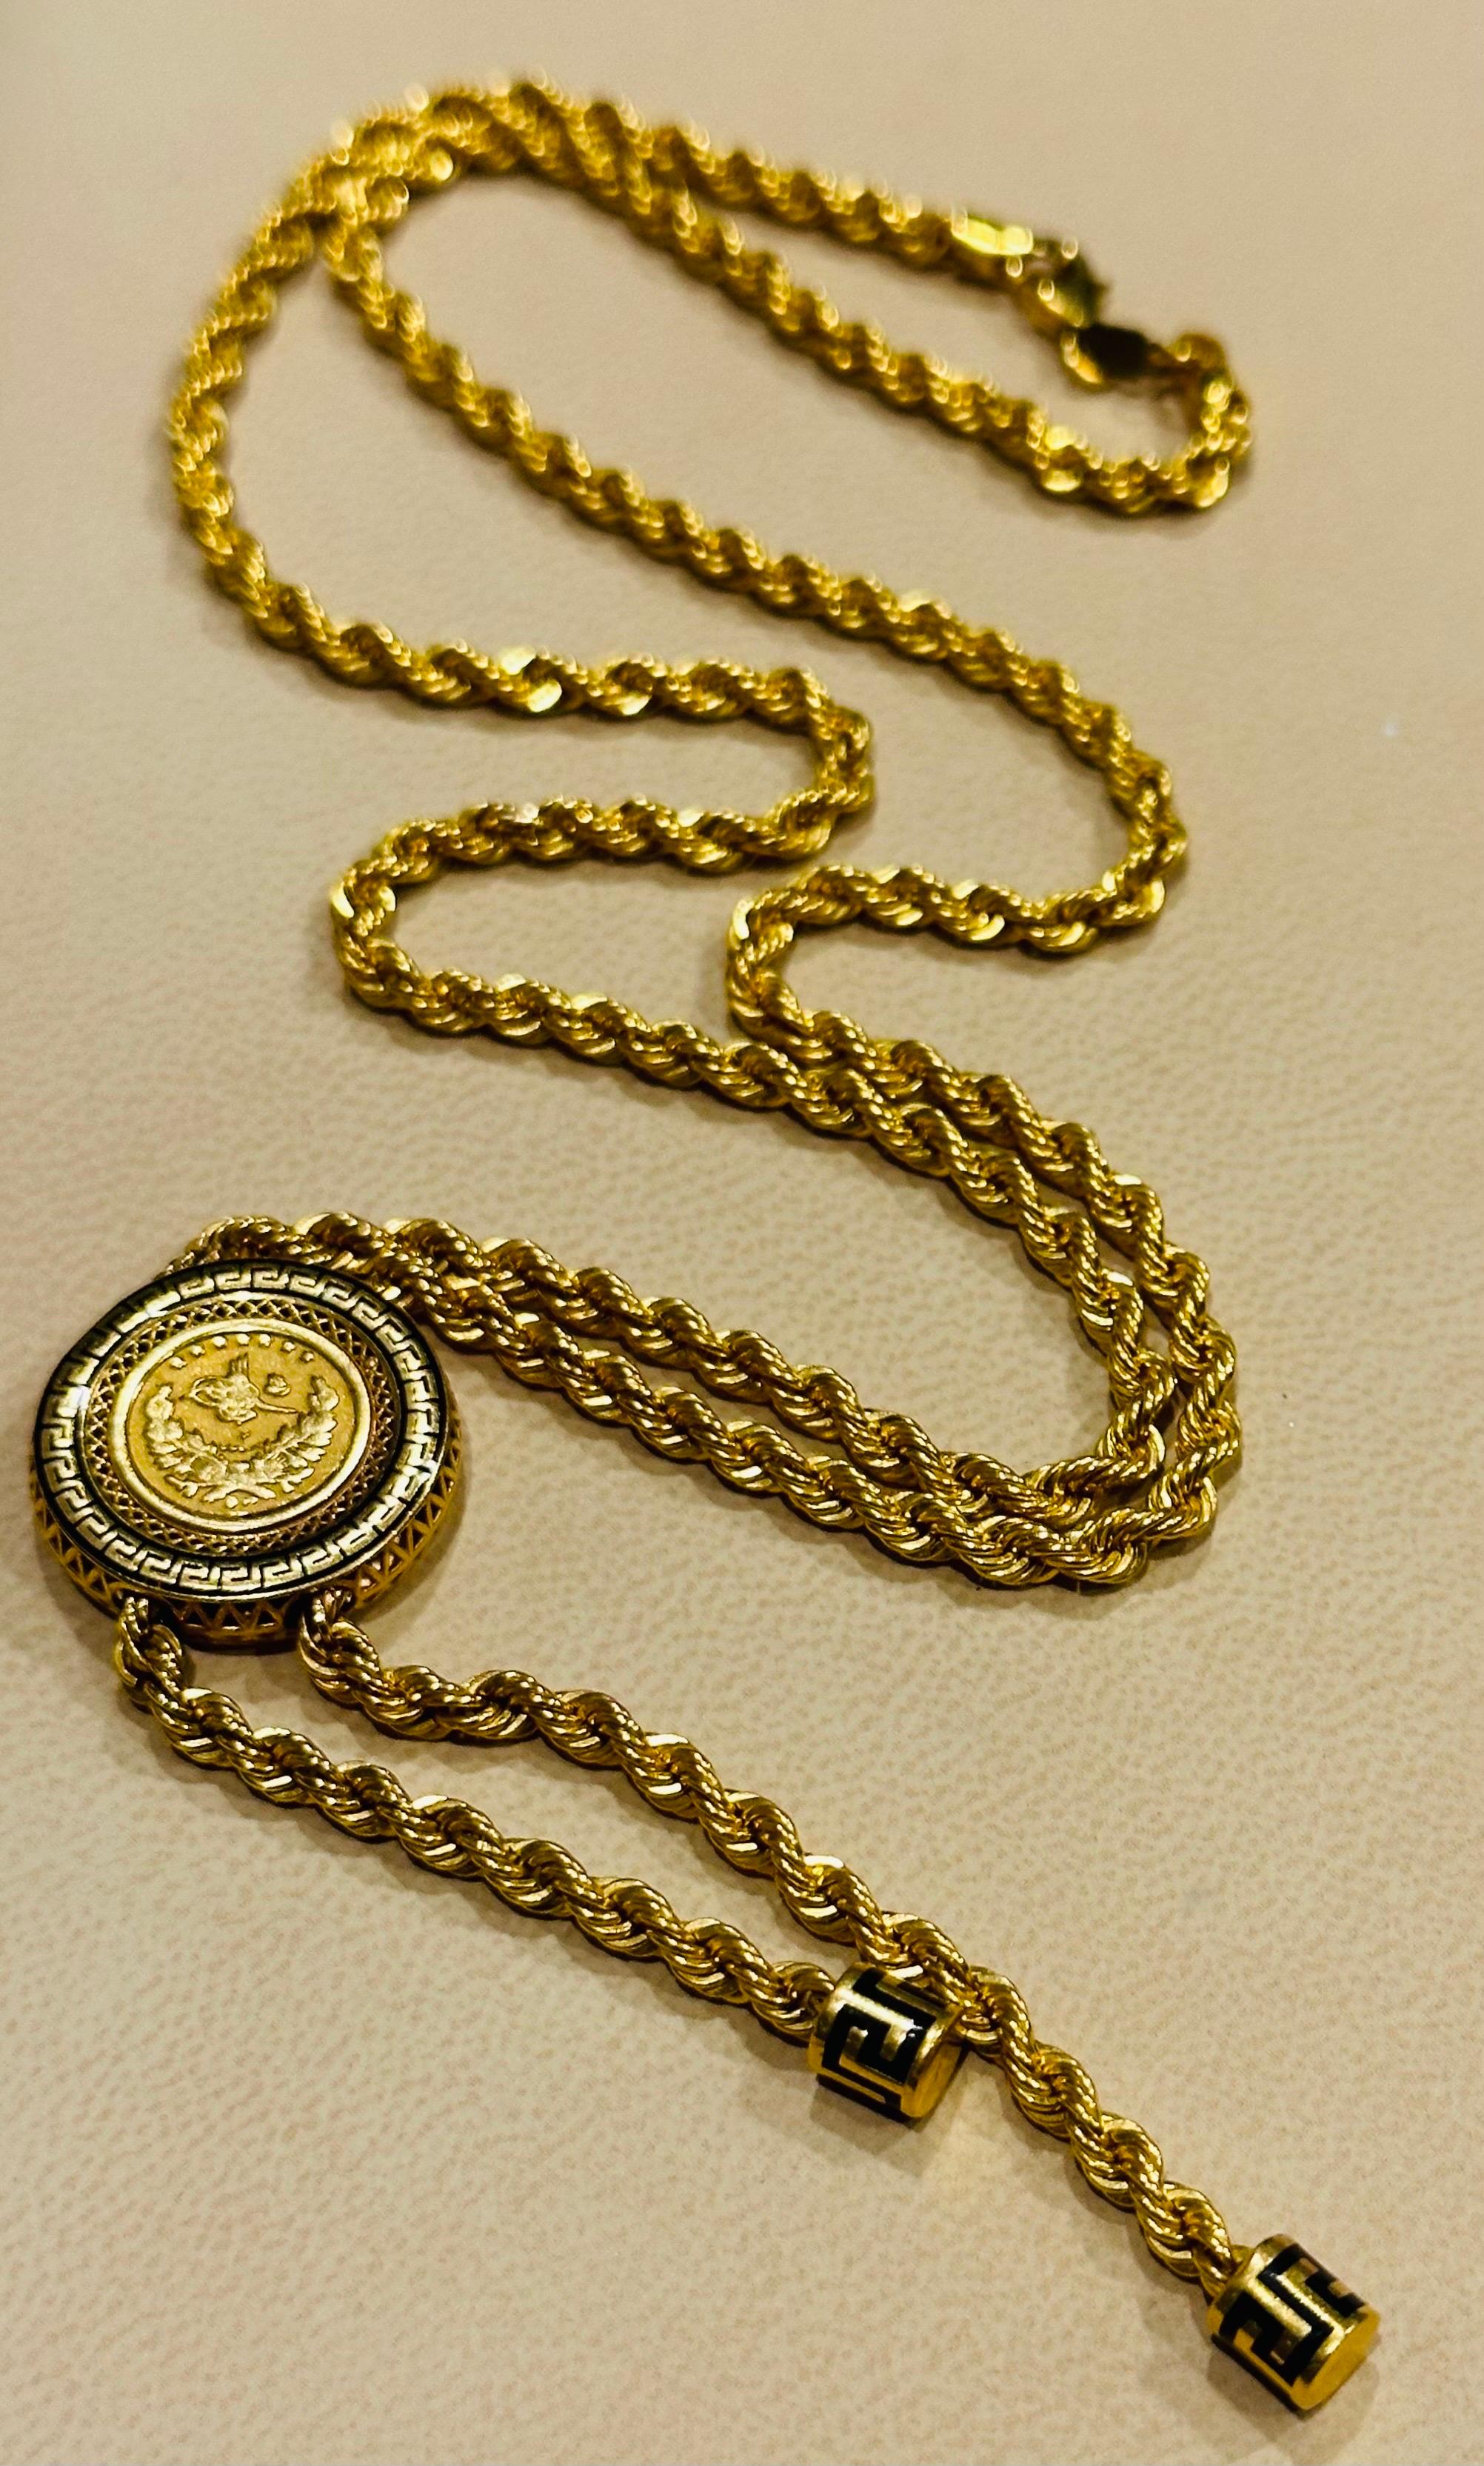 21 Karat Yellow Gold Coin Vintage Necklace with Hanging 8